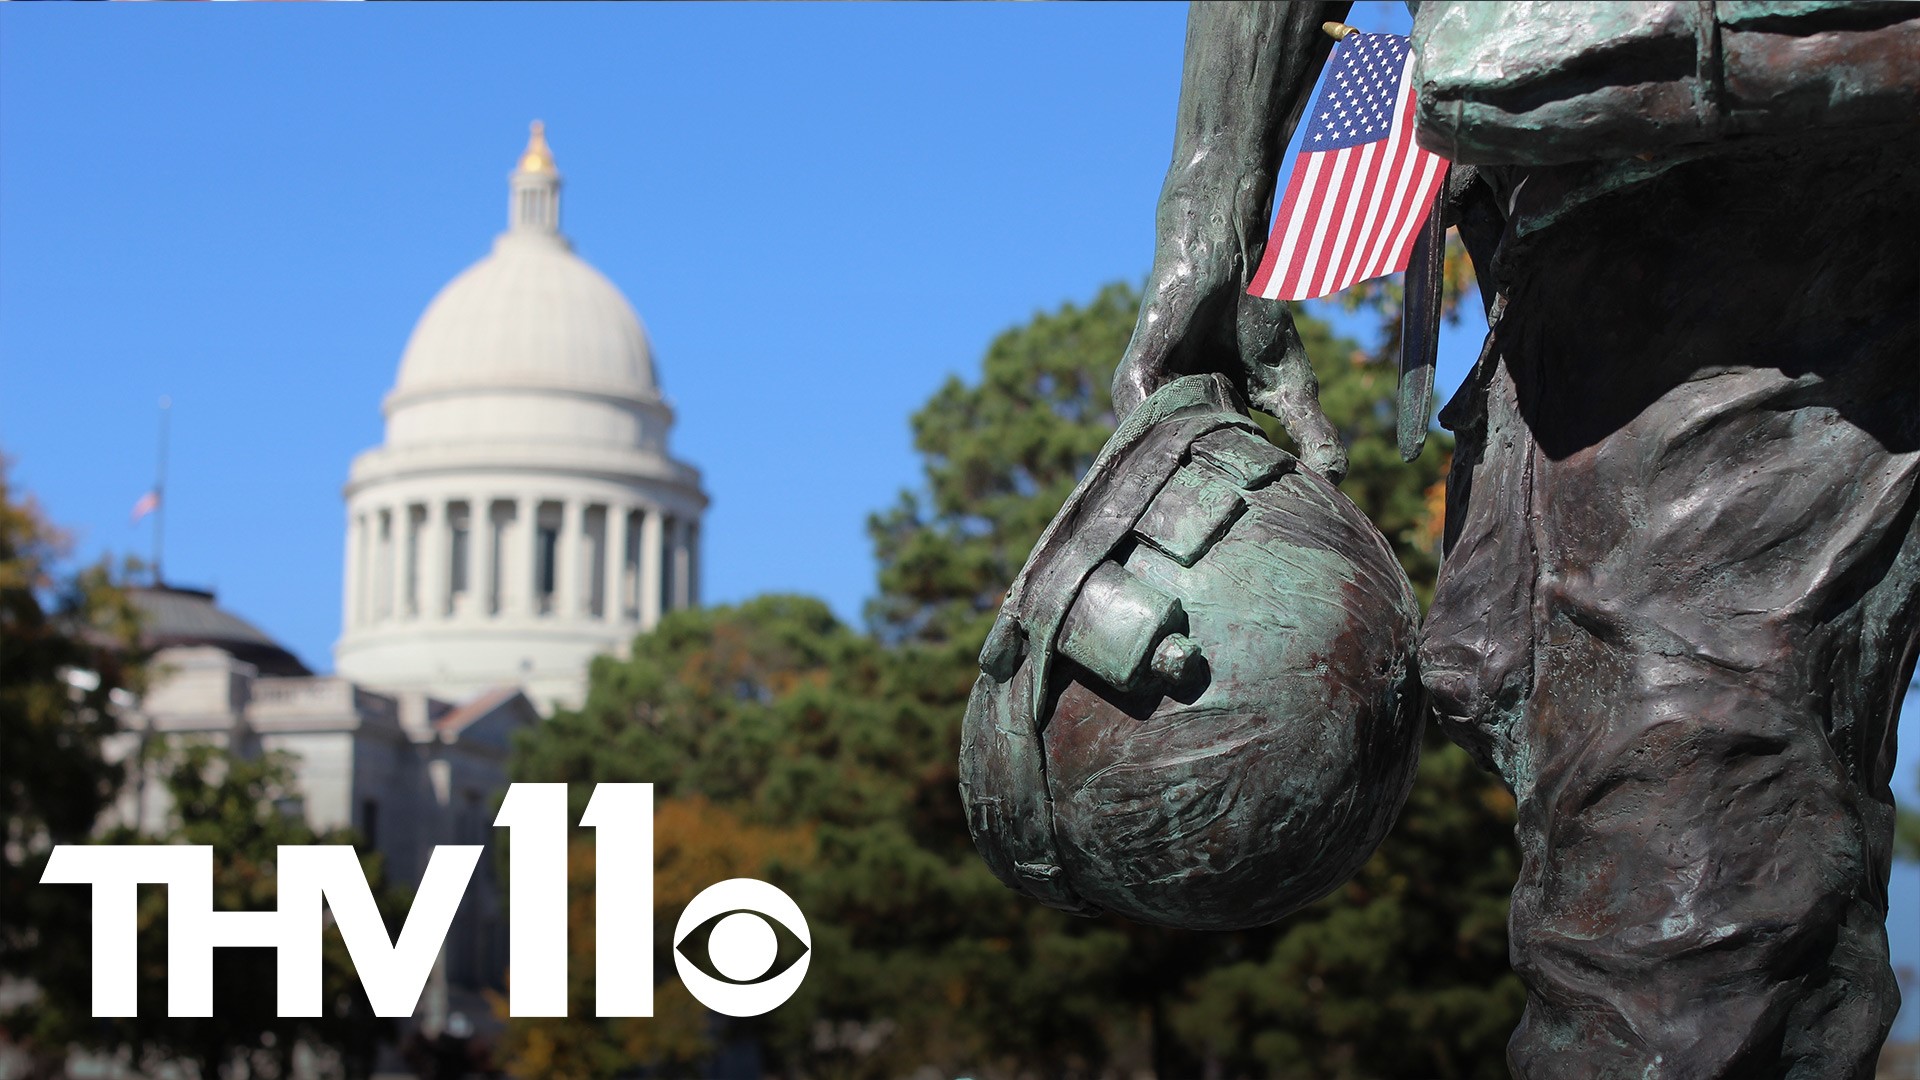 On this Veterans Day, THV11's Rolly Hoyt looks at things we need to do protect the former service members in our lives, where suicide is a real danger.